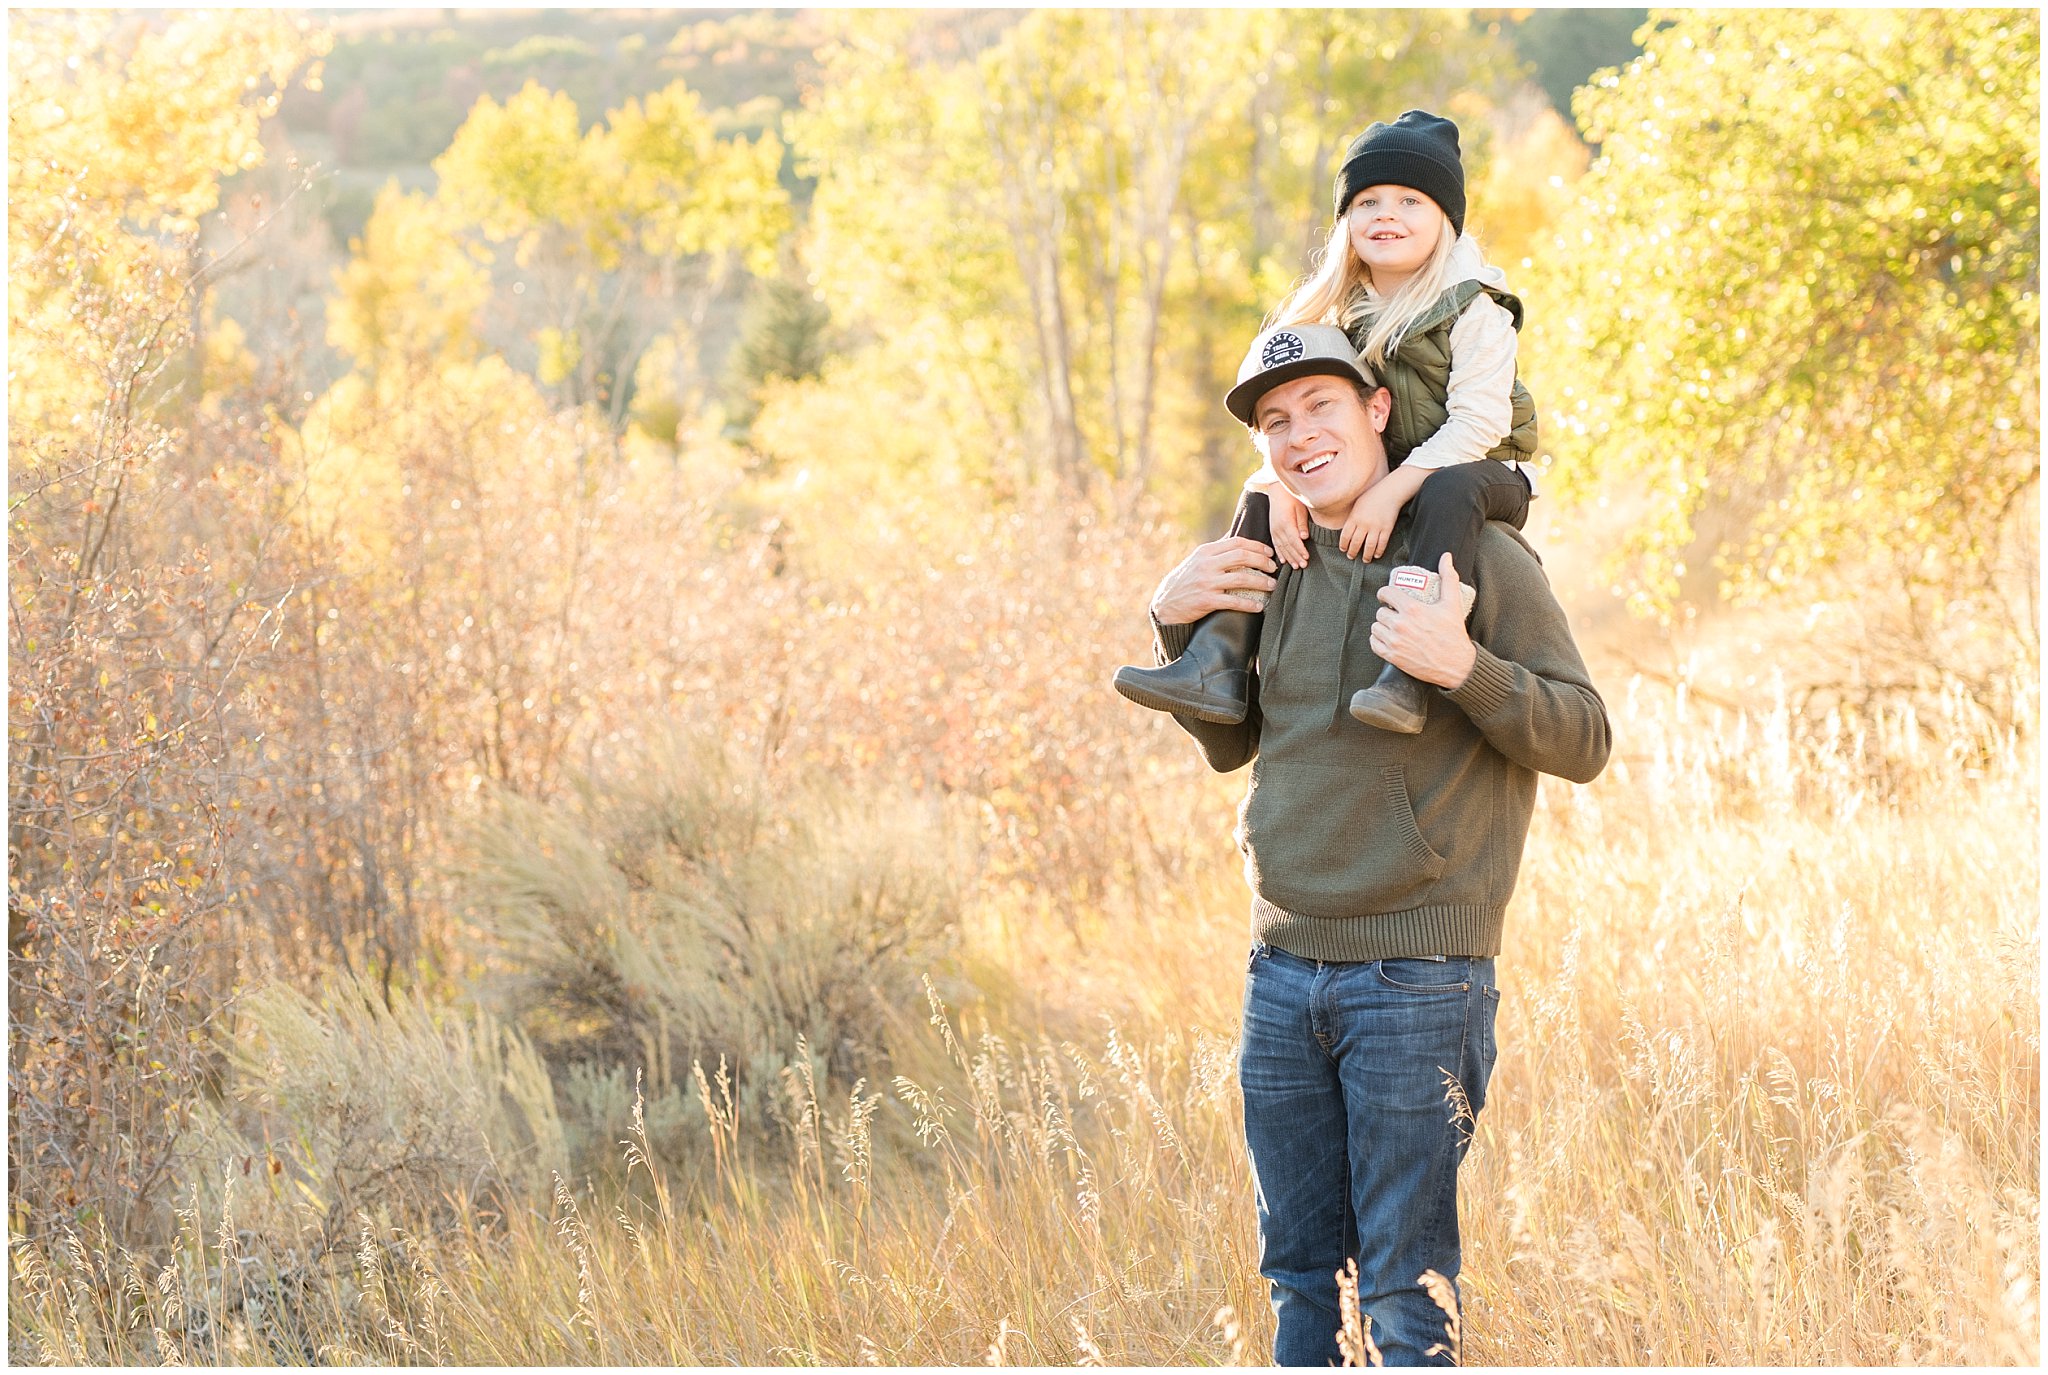 Dad giving son a piggy back ride with the fall colors | Fall Family Pictures in the Mountains | Snowbasin, Utah | Jessie and Dallin